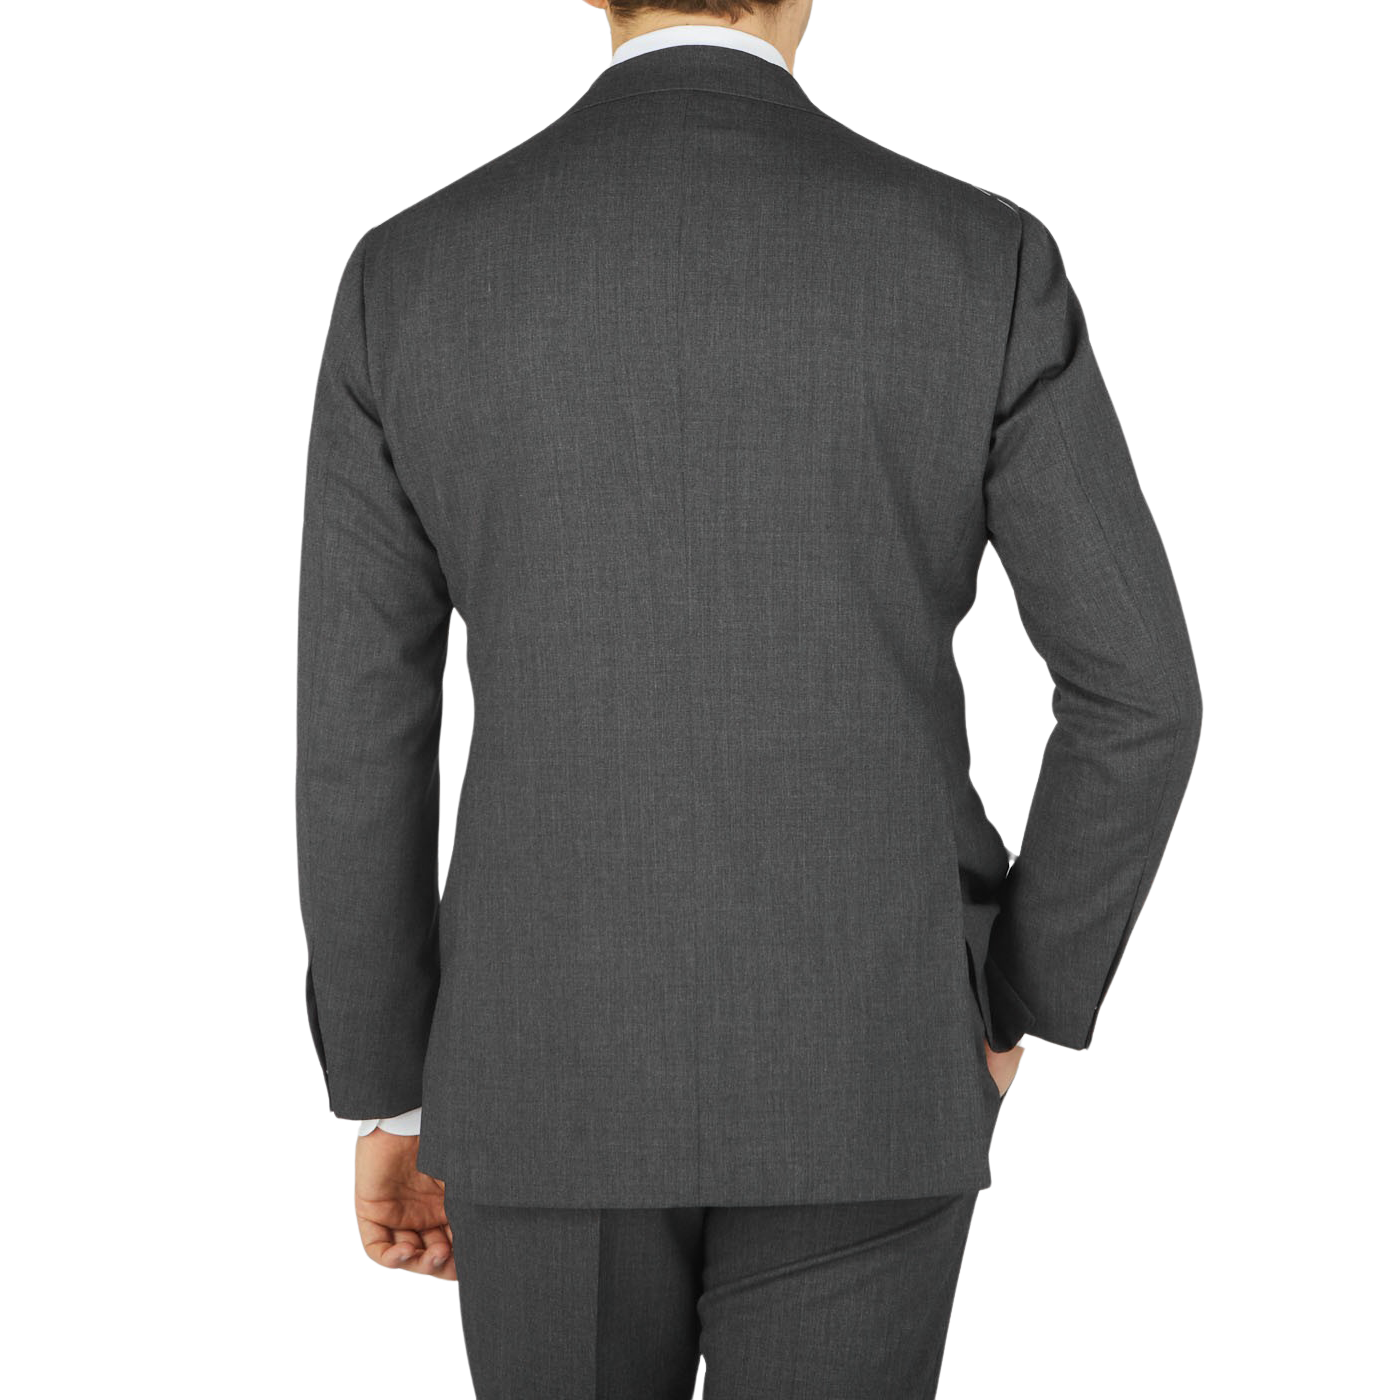 Rear view of a man wearing a Dark Grey High Twist Wool Suit by Ring Jacket, standing against a light gray background.